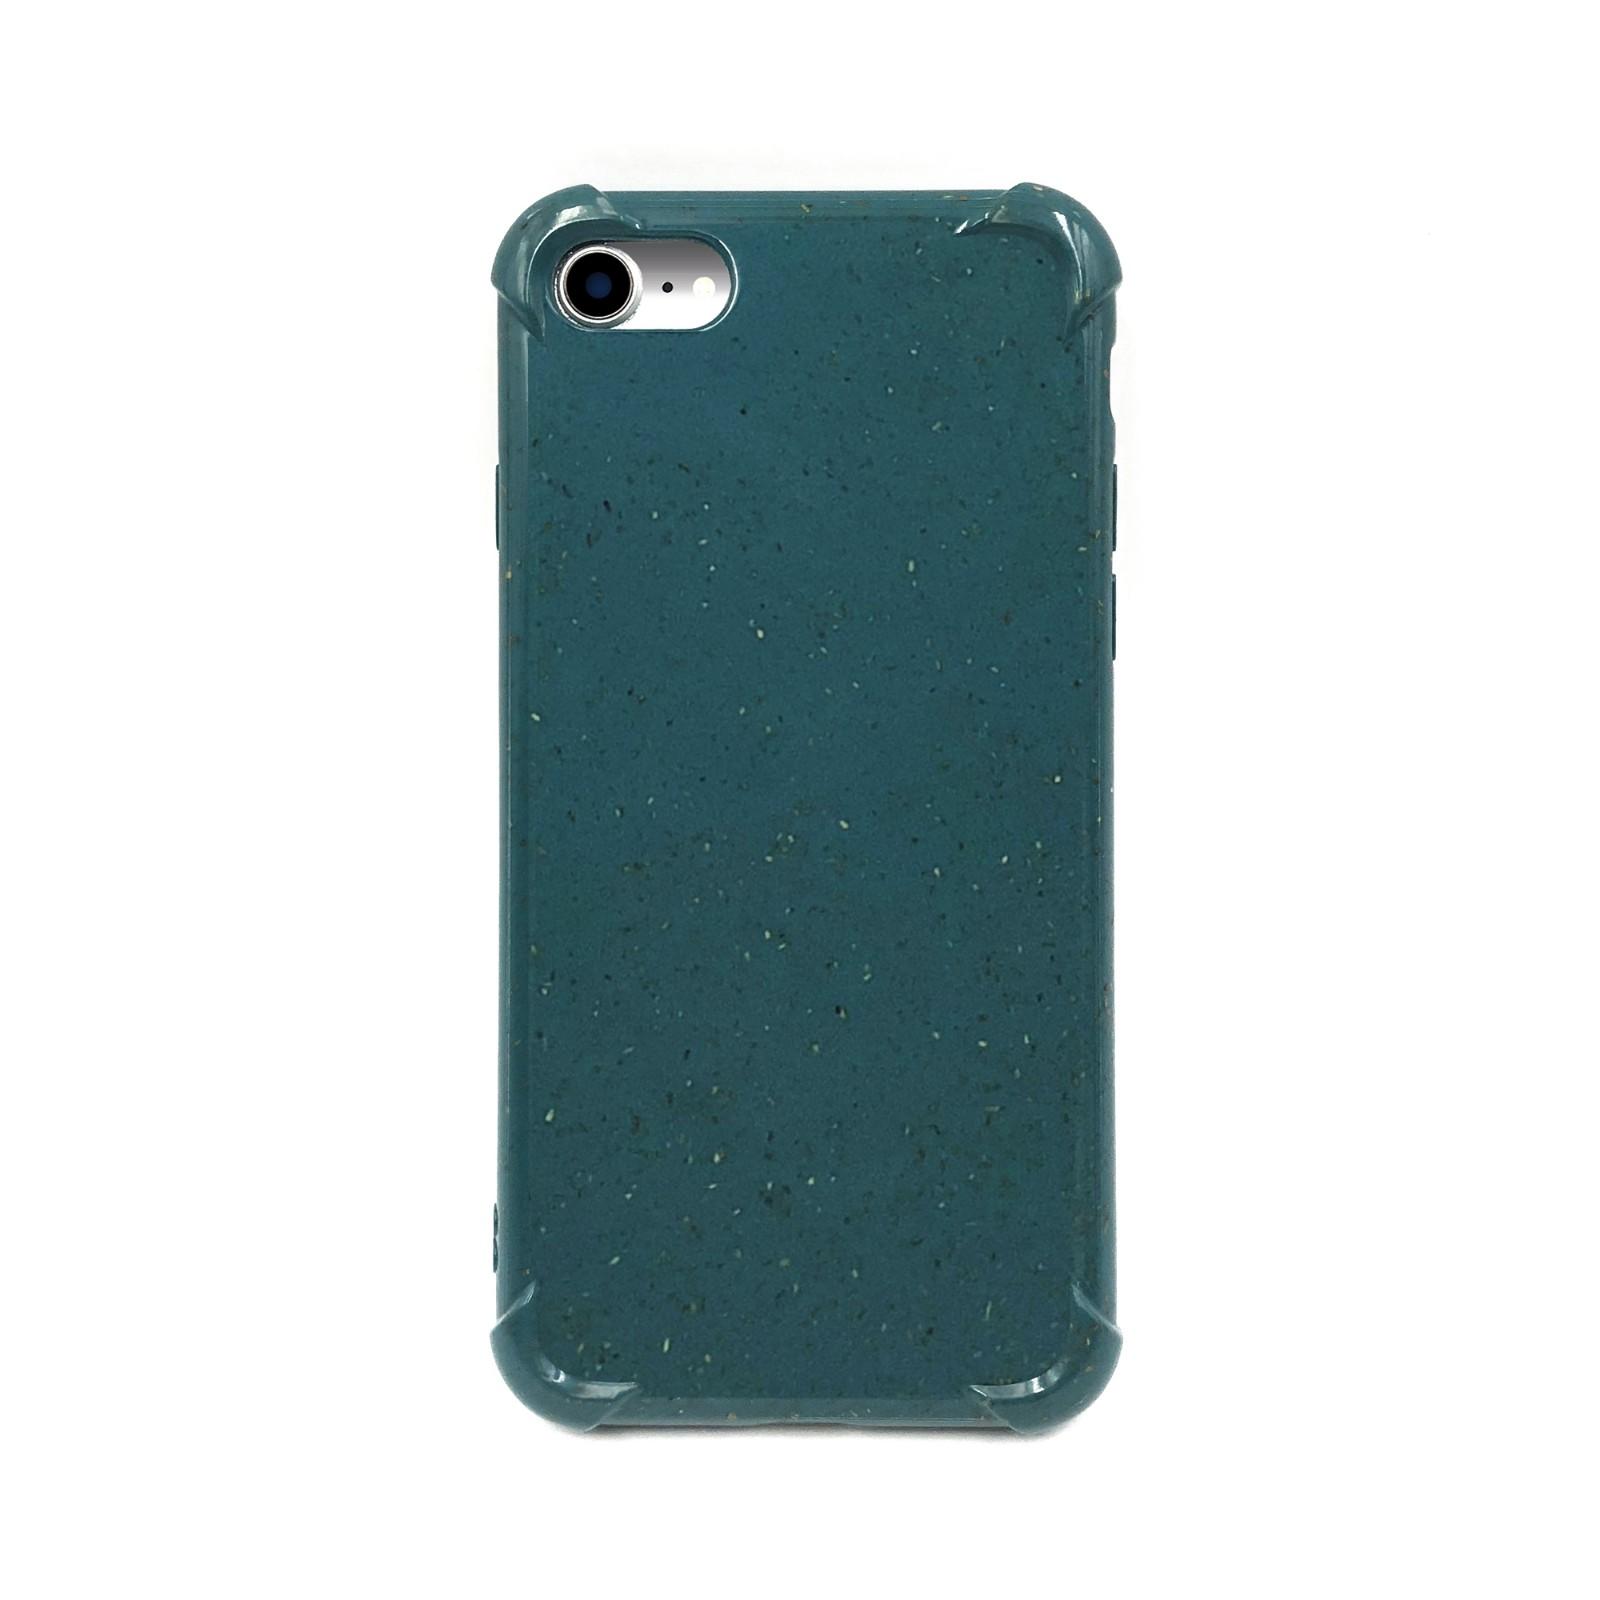 pla0002 cell phone case manufacturers pla0001 for store TenChen Tech